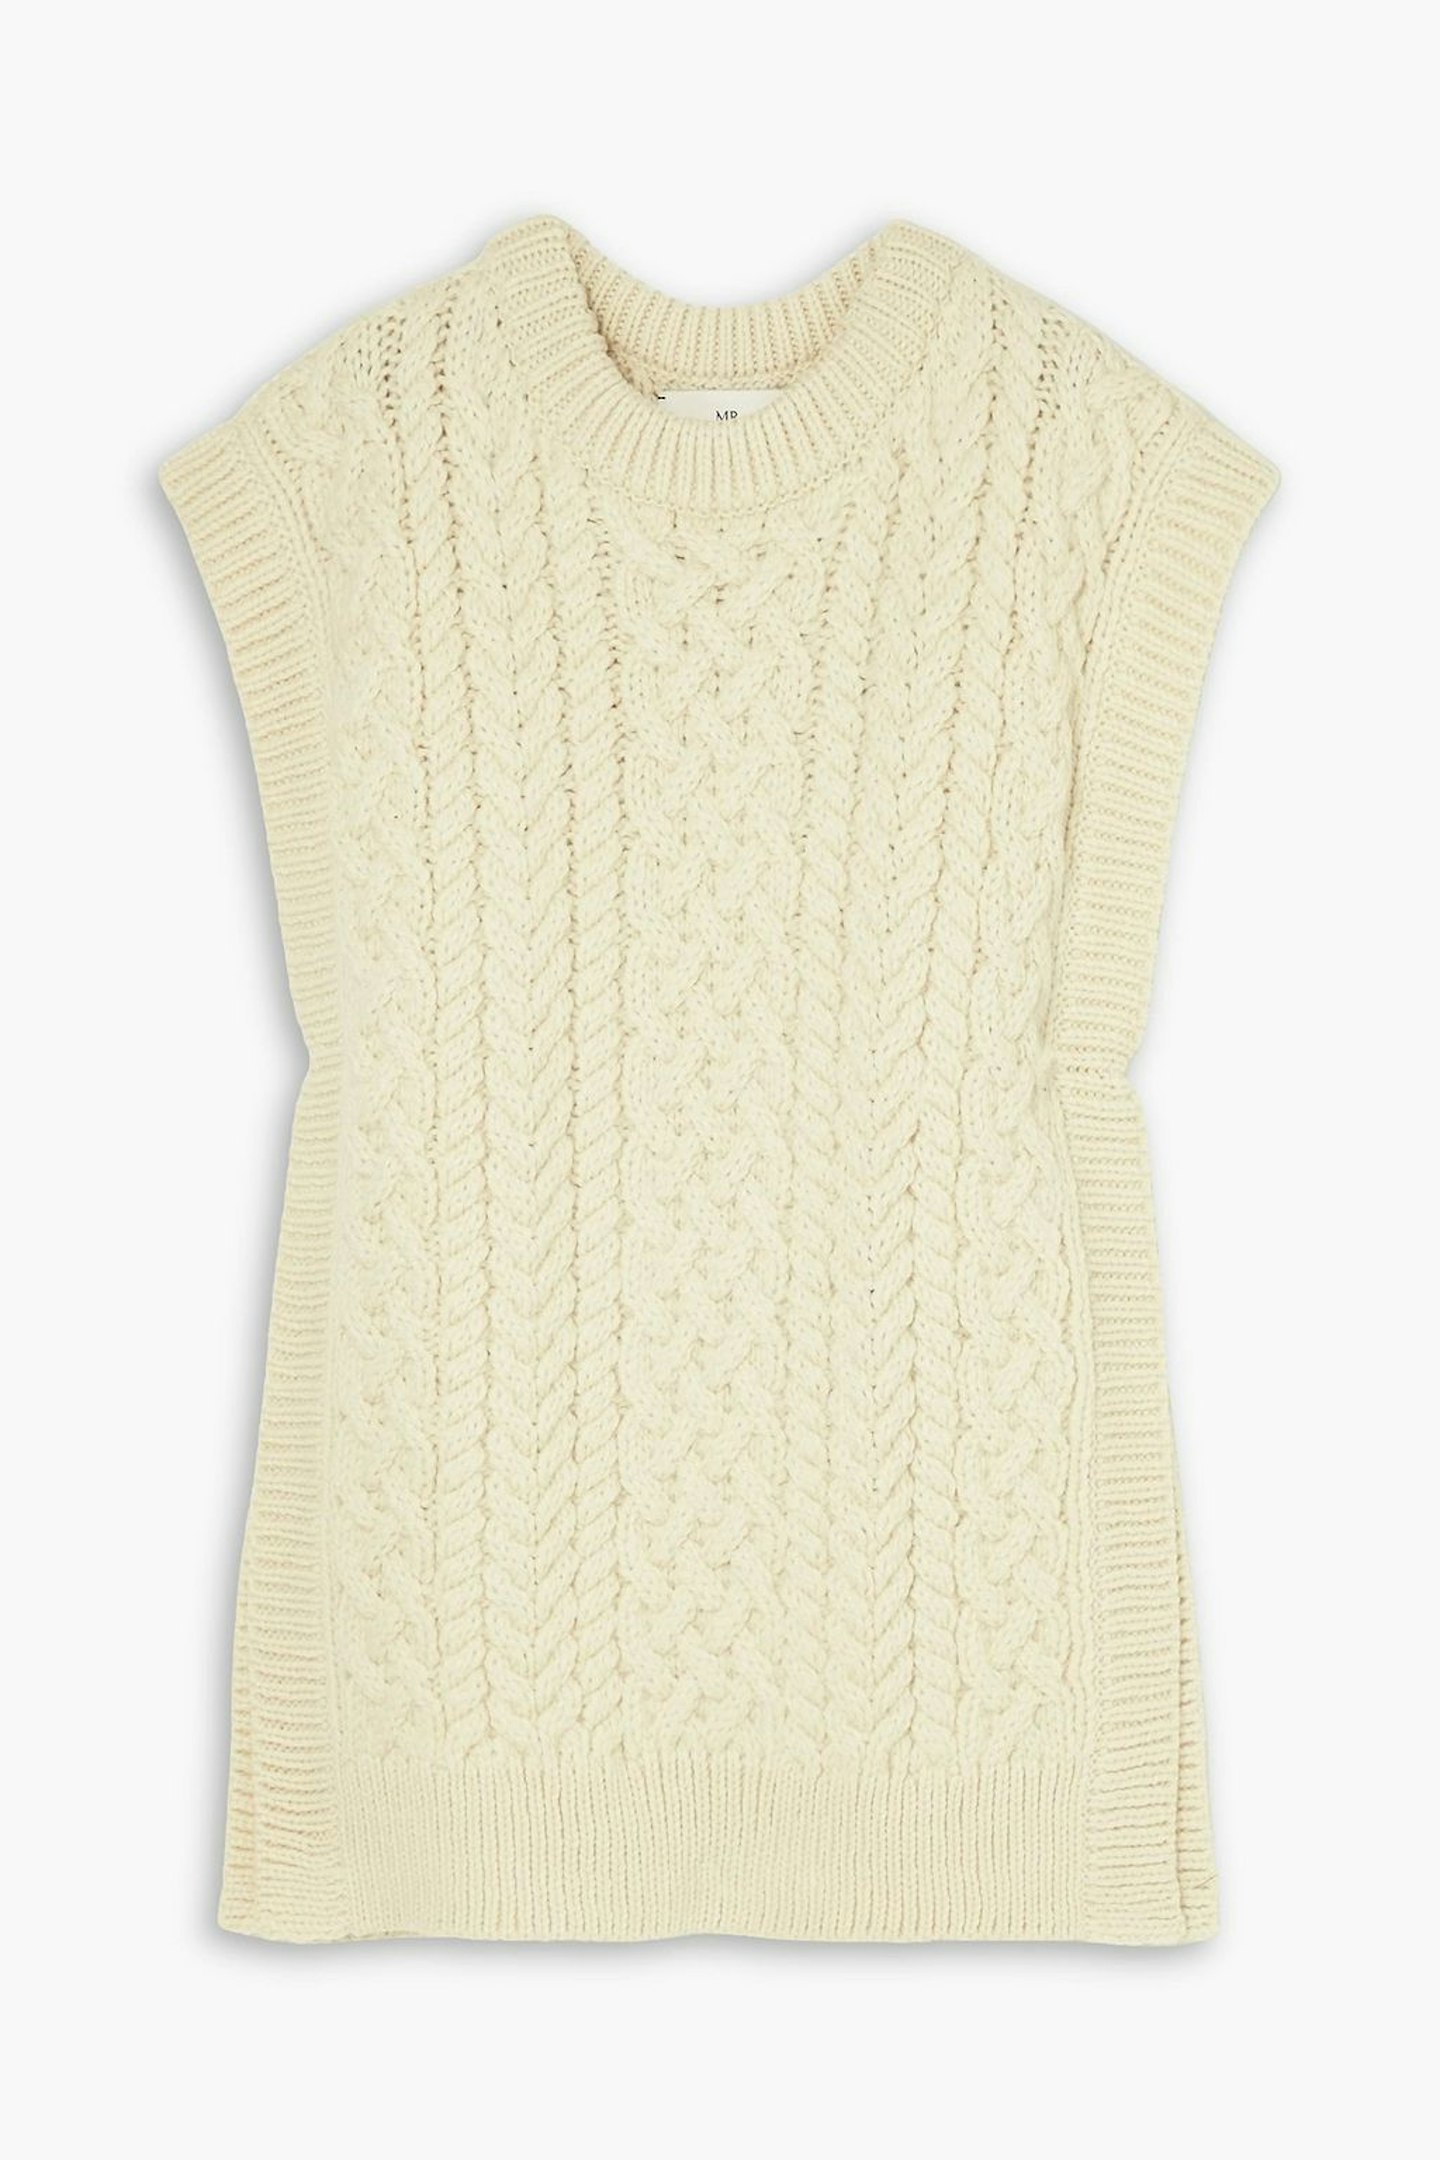 Mr Mittens, Cable-Knit Wool Vest